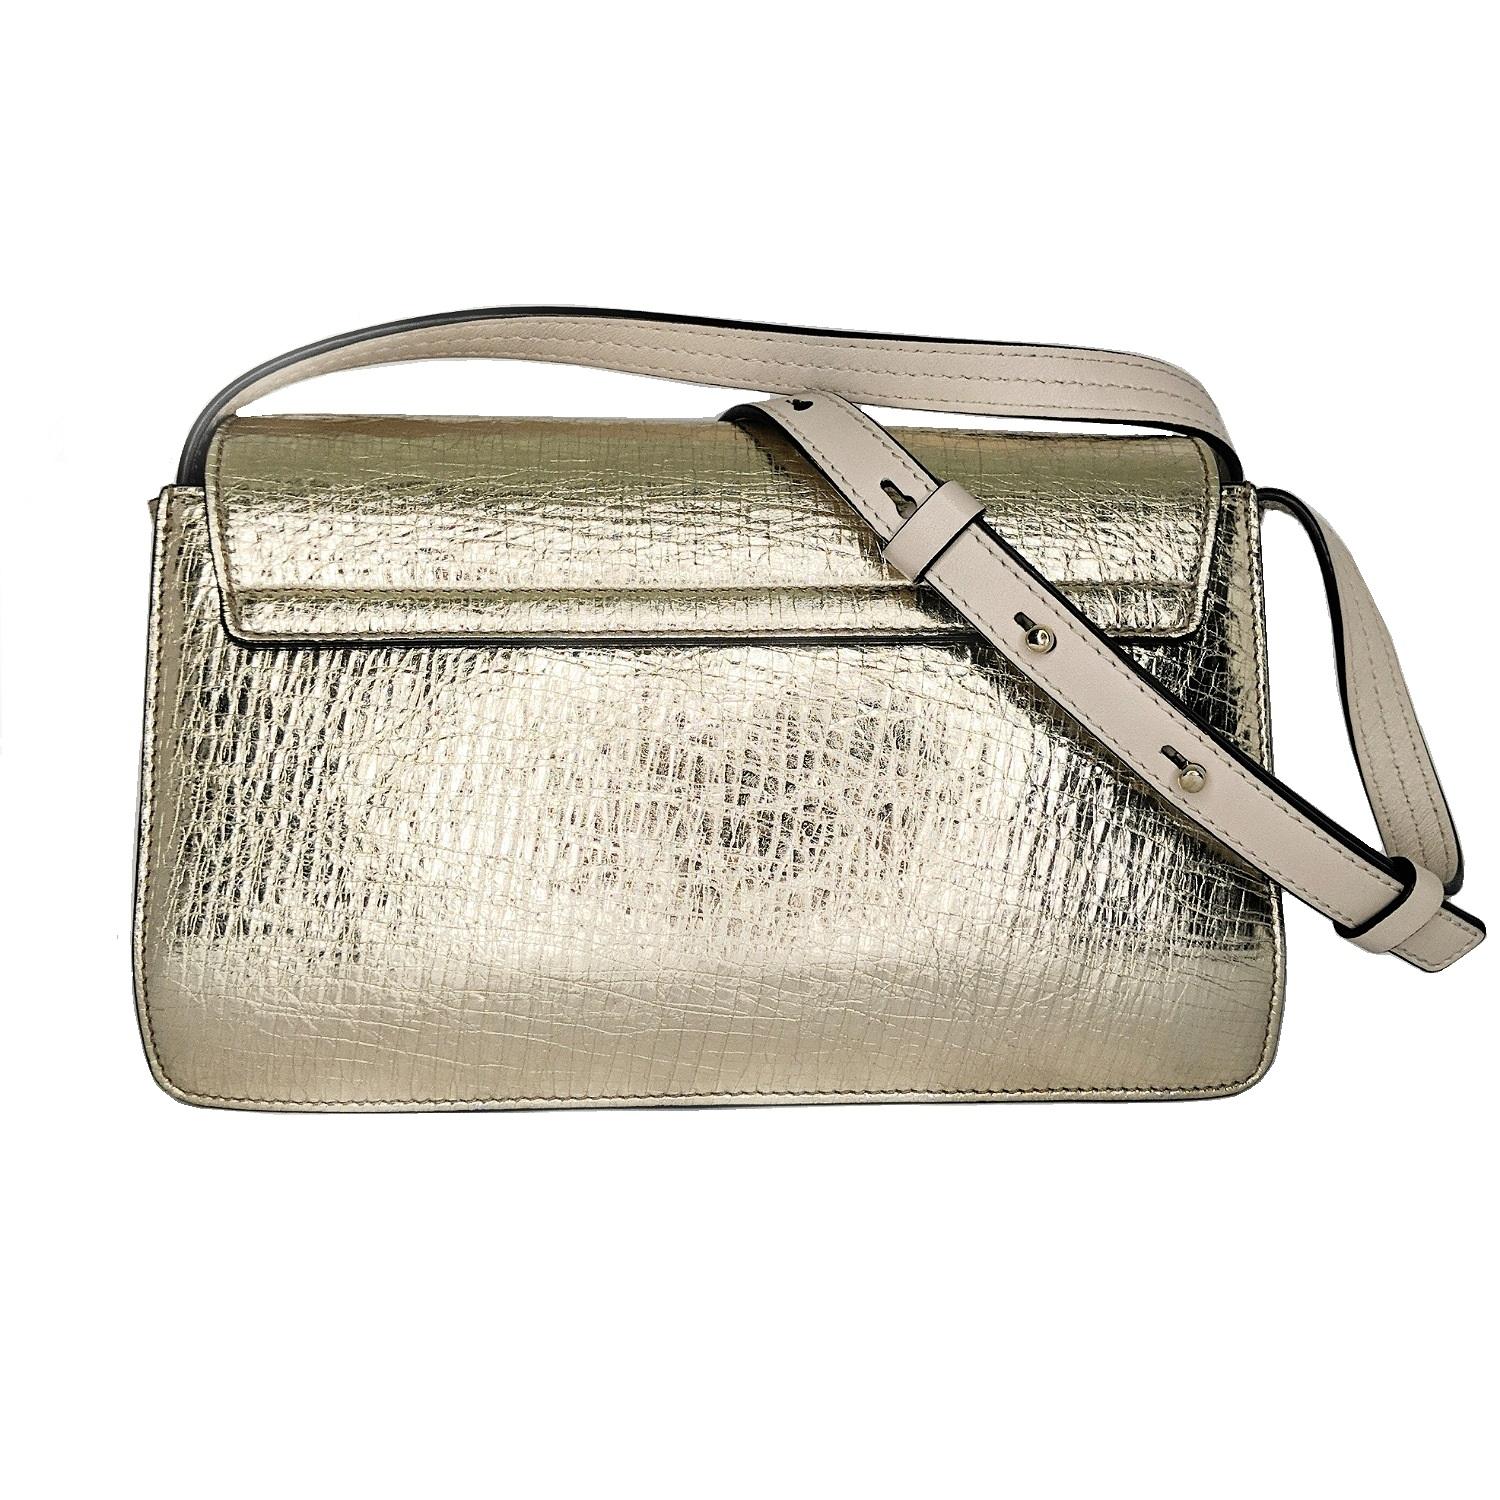 Metallic gold leather Chloé Small Faye crossbody bag with multi-tonal hardware, single flat shoulder strap, tonal suede trim, three interior compartments, beige suede lining, single slit pocket at interior wall and magnetic snap closure at front